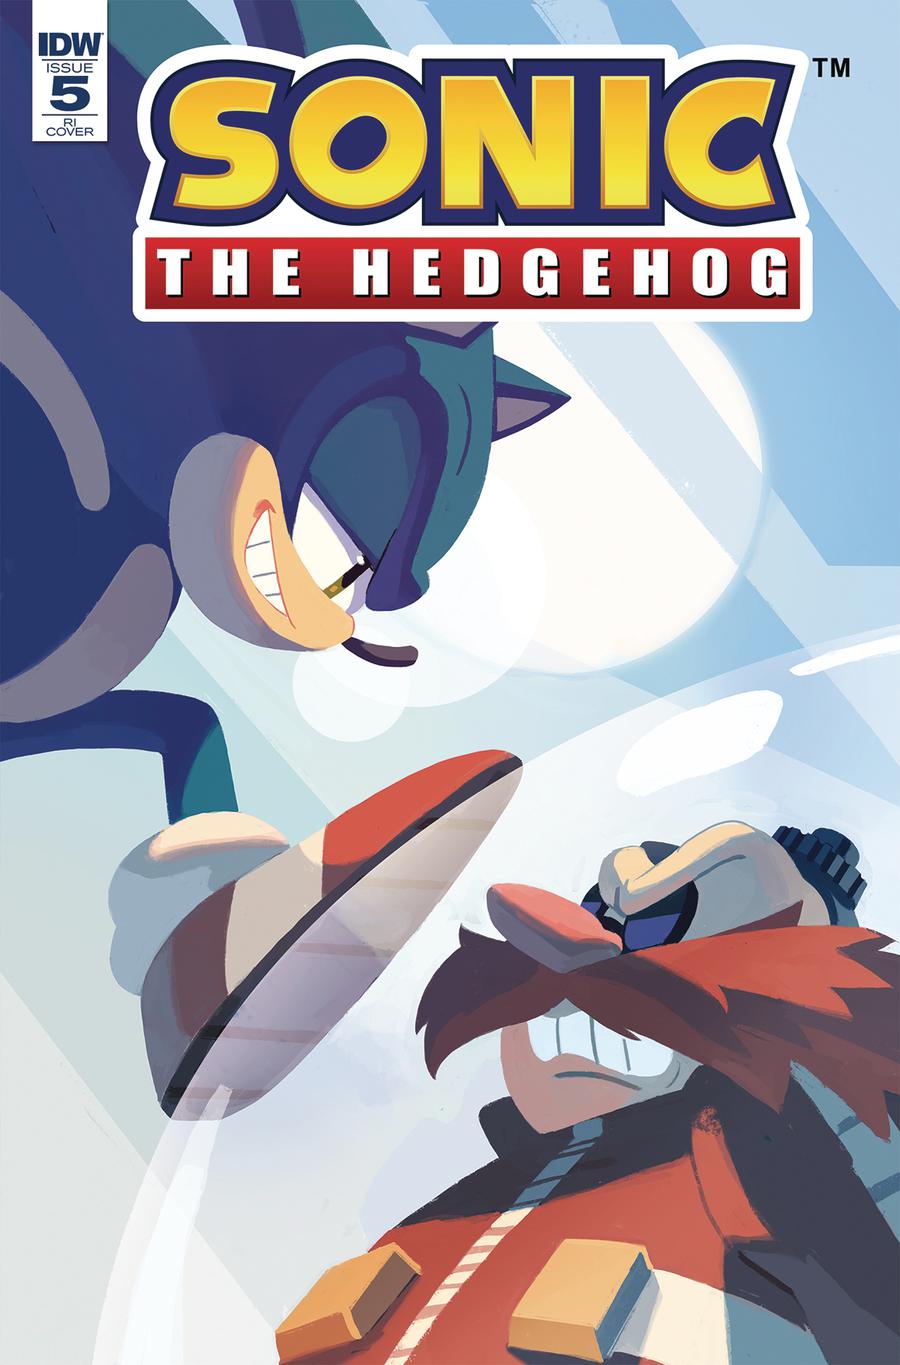 Sonic The Hedgehog Vol 3 #5 Cover C Incentive Nathalie Fourdraine Variant Cover